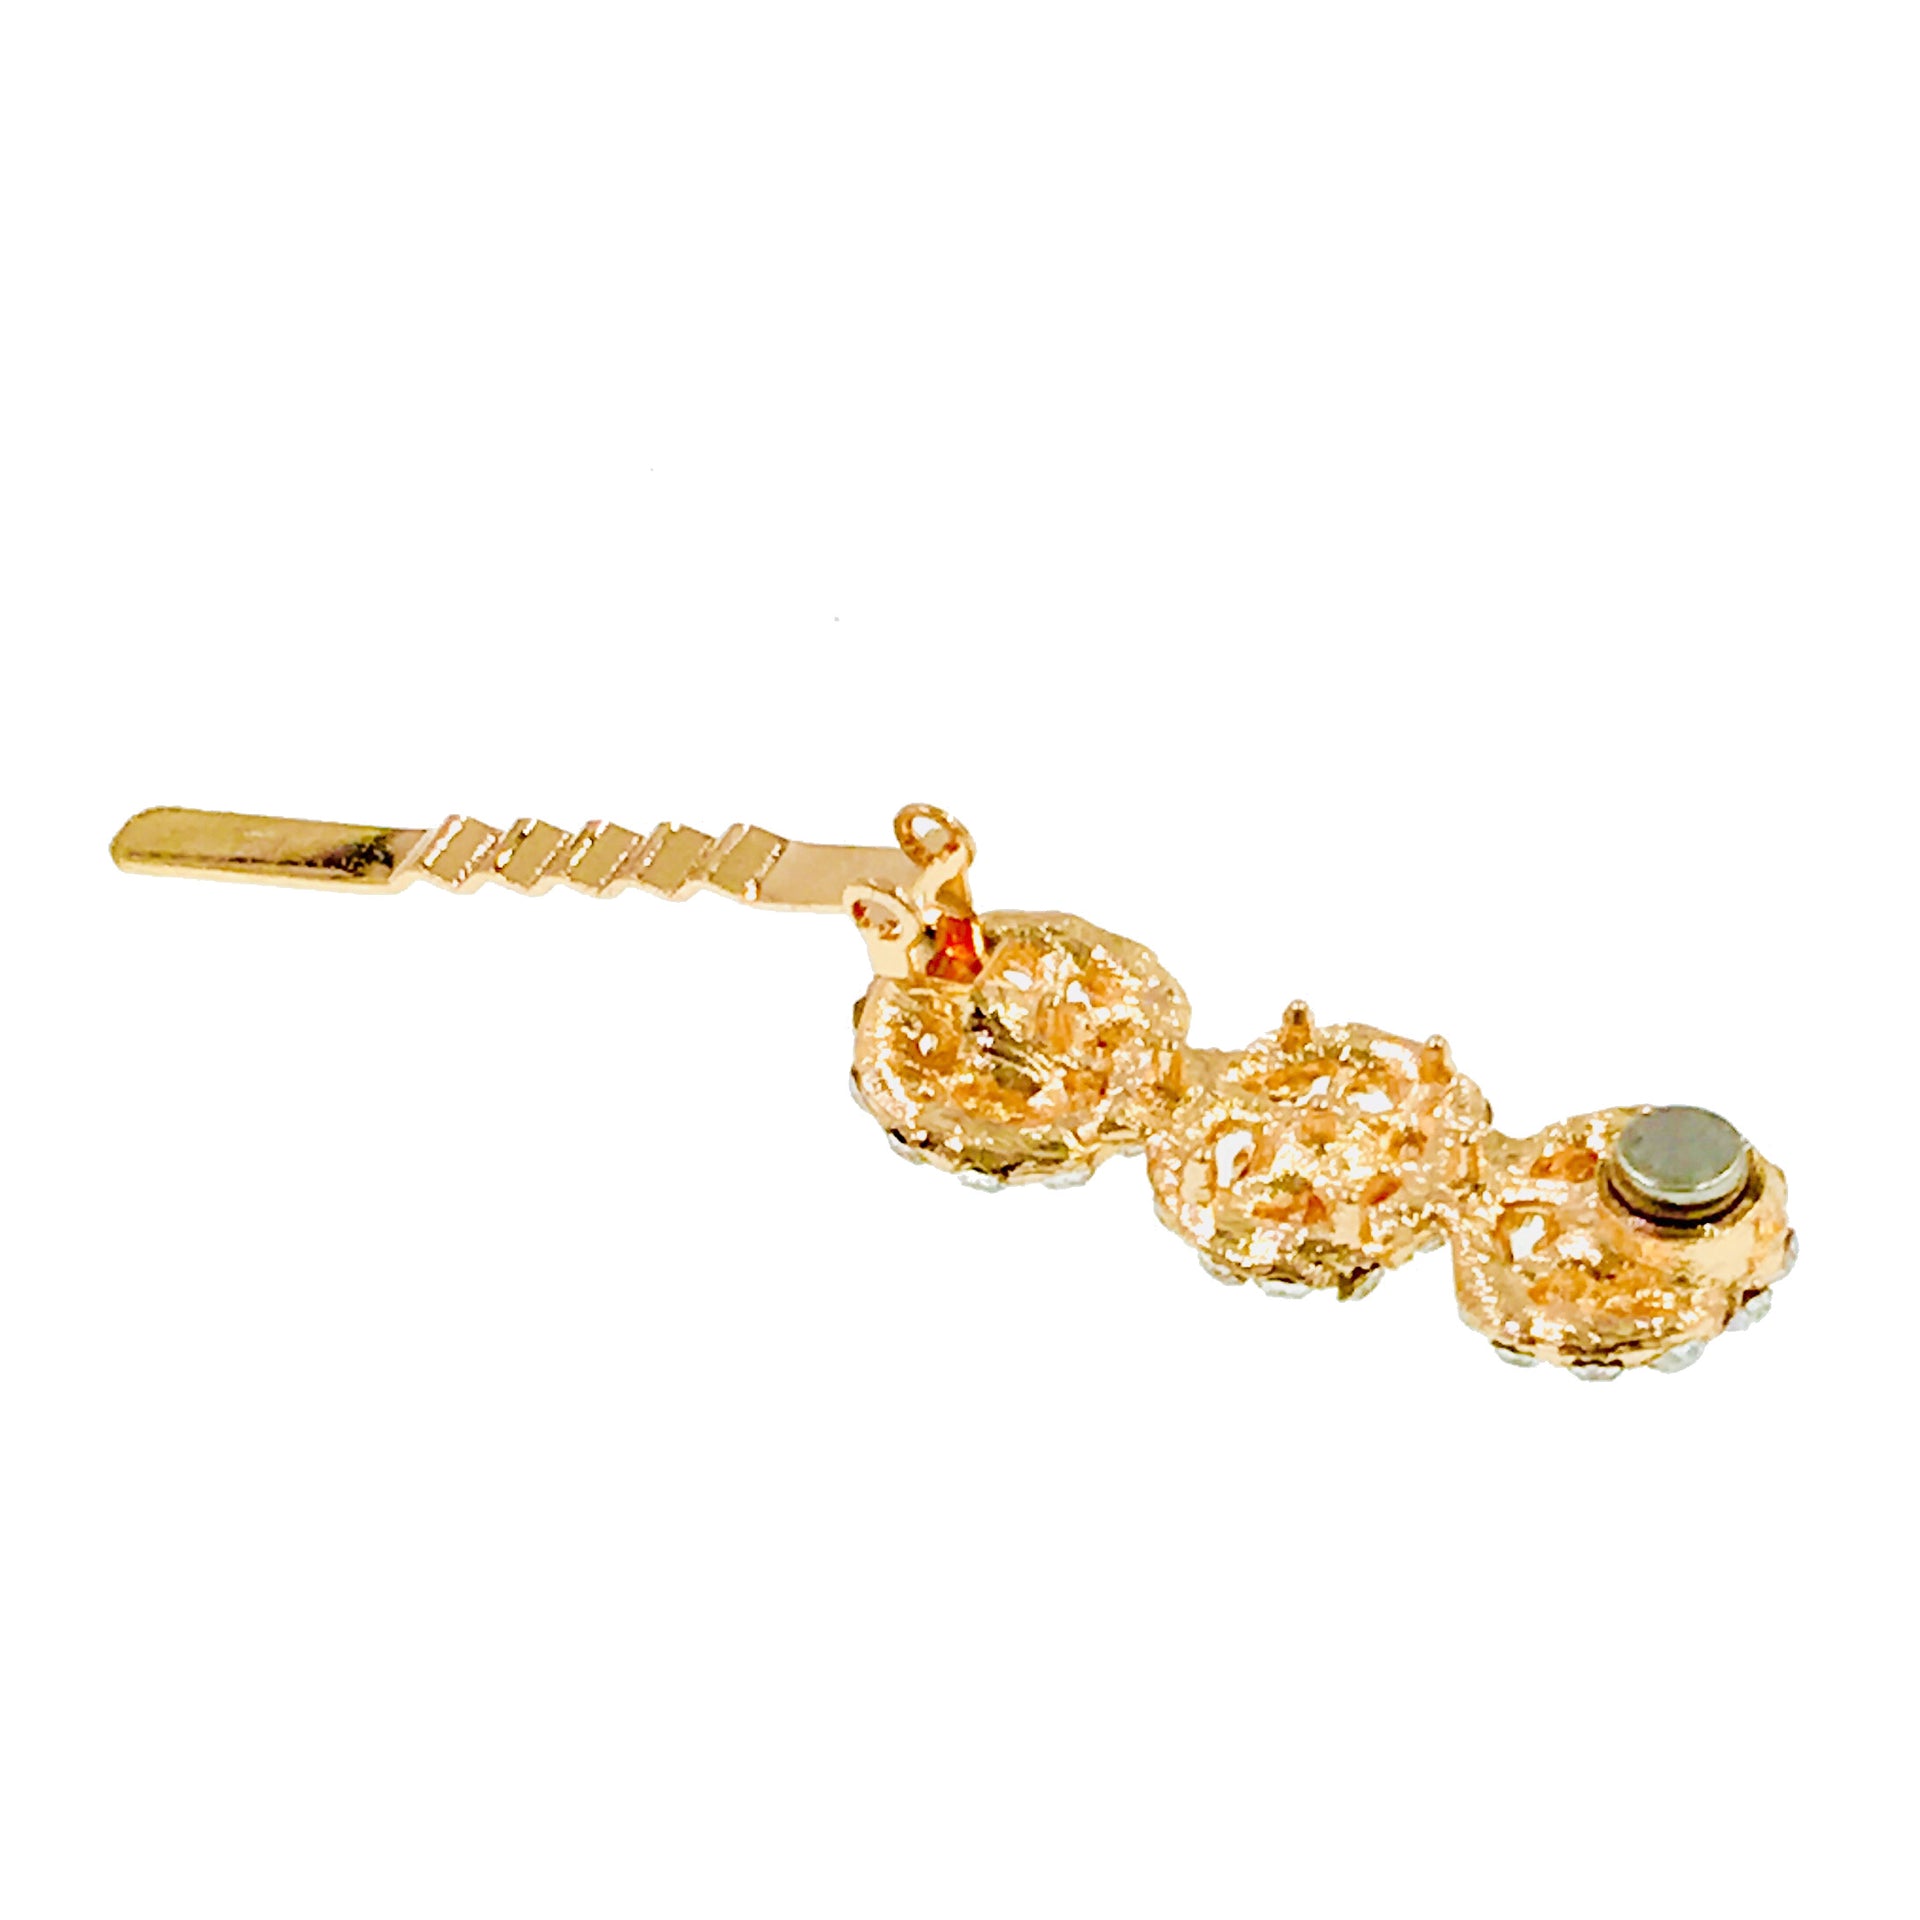 Sunflower Trio Magnetic Hair Clip use Rhinestone Crystal gold base, Magnetic Clip - MOGHANT